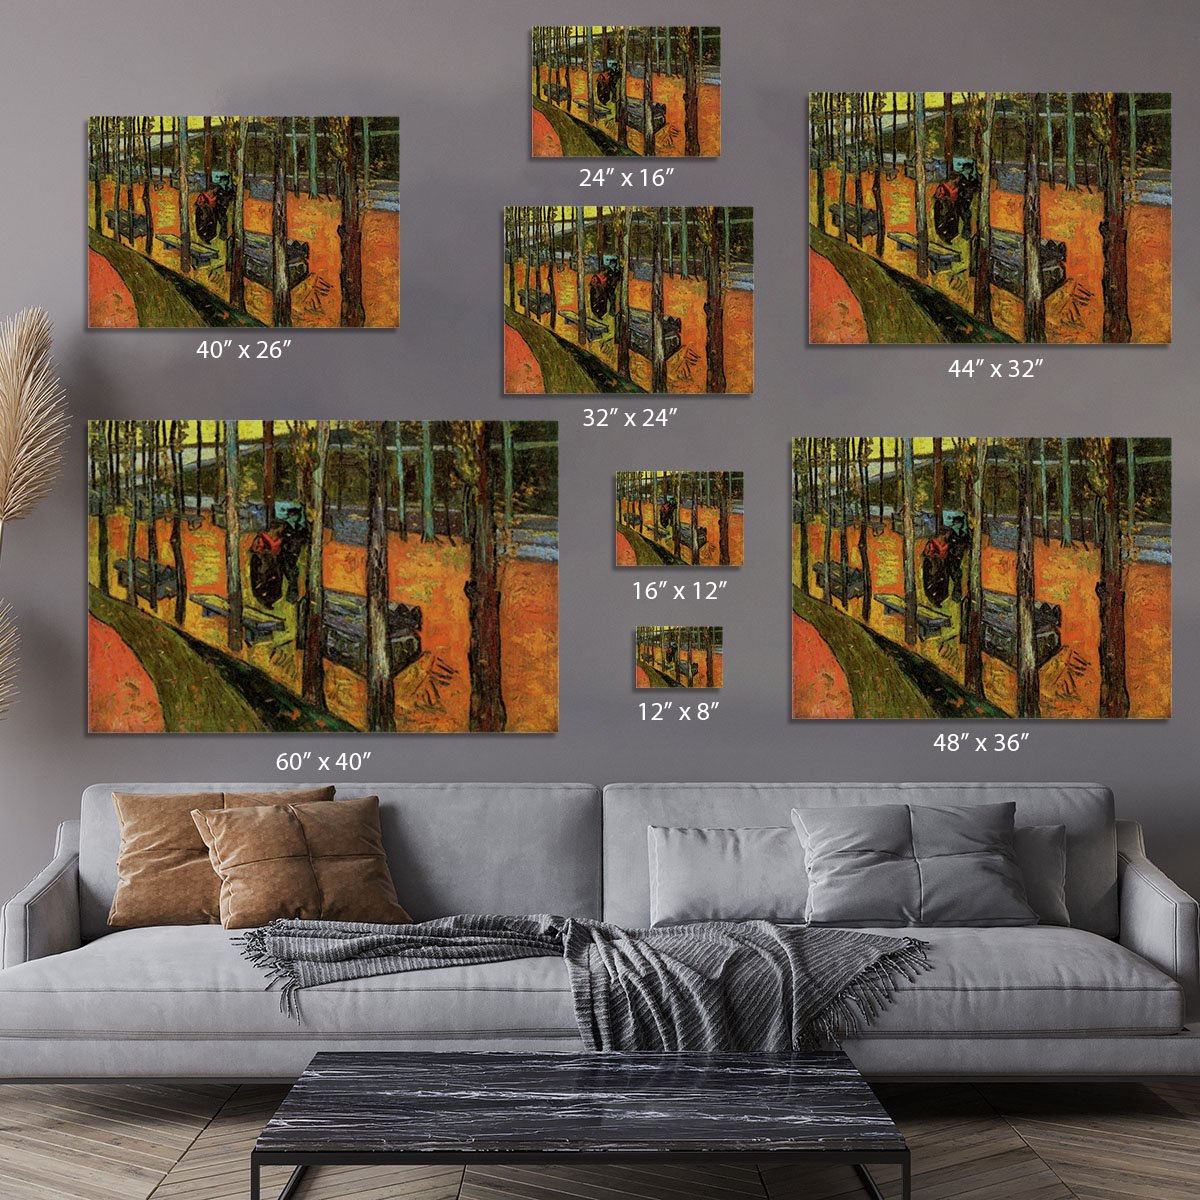 Les Alyscamps 2 by Van Gogh Canvas Print or Poster